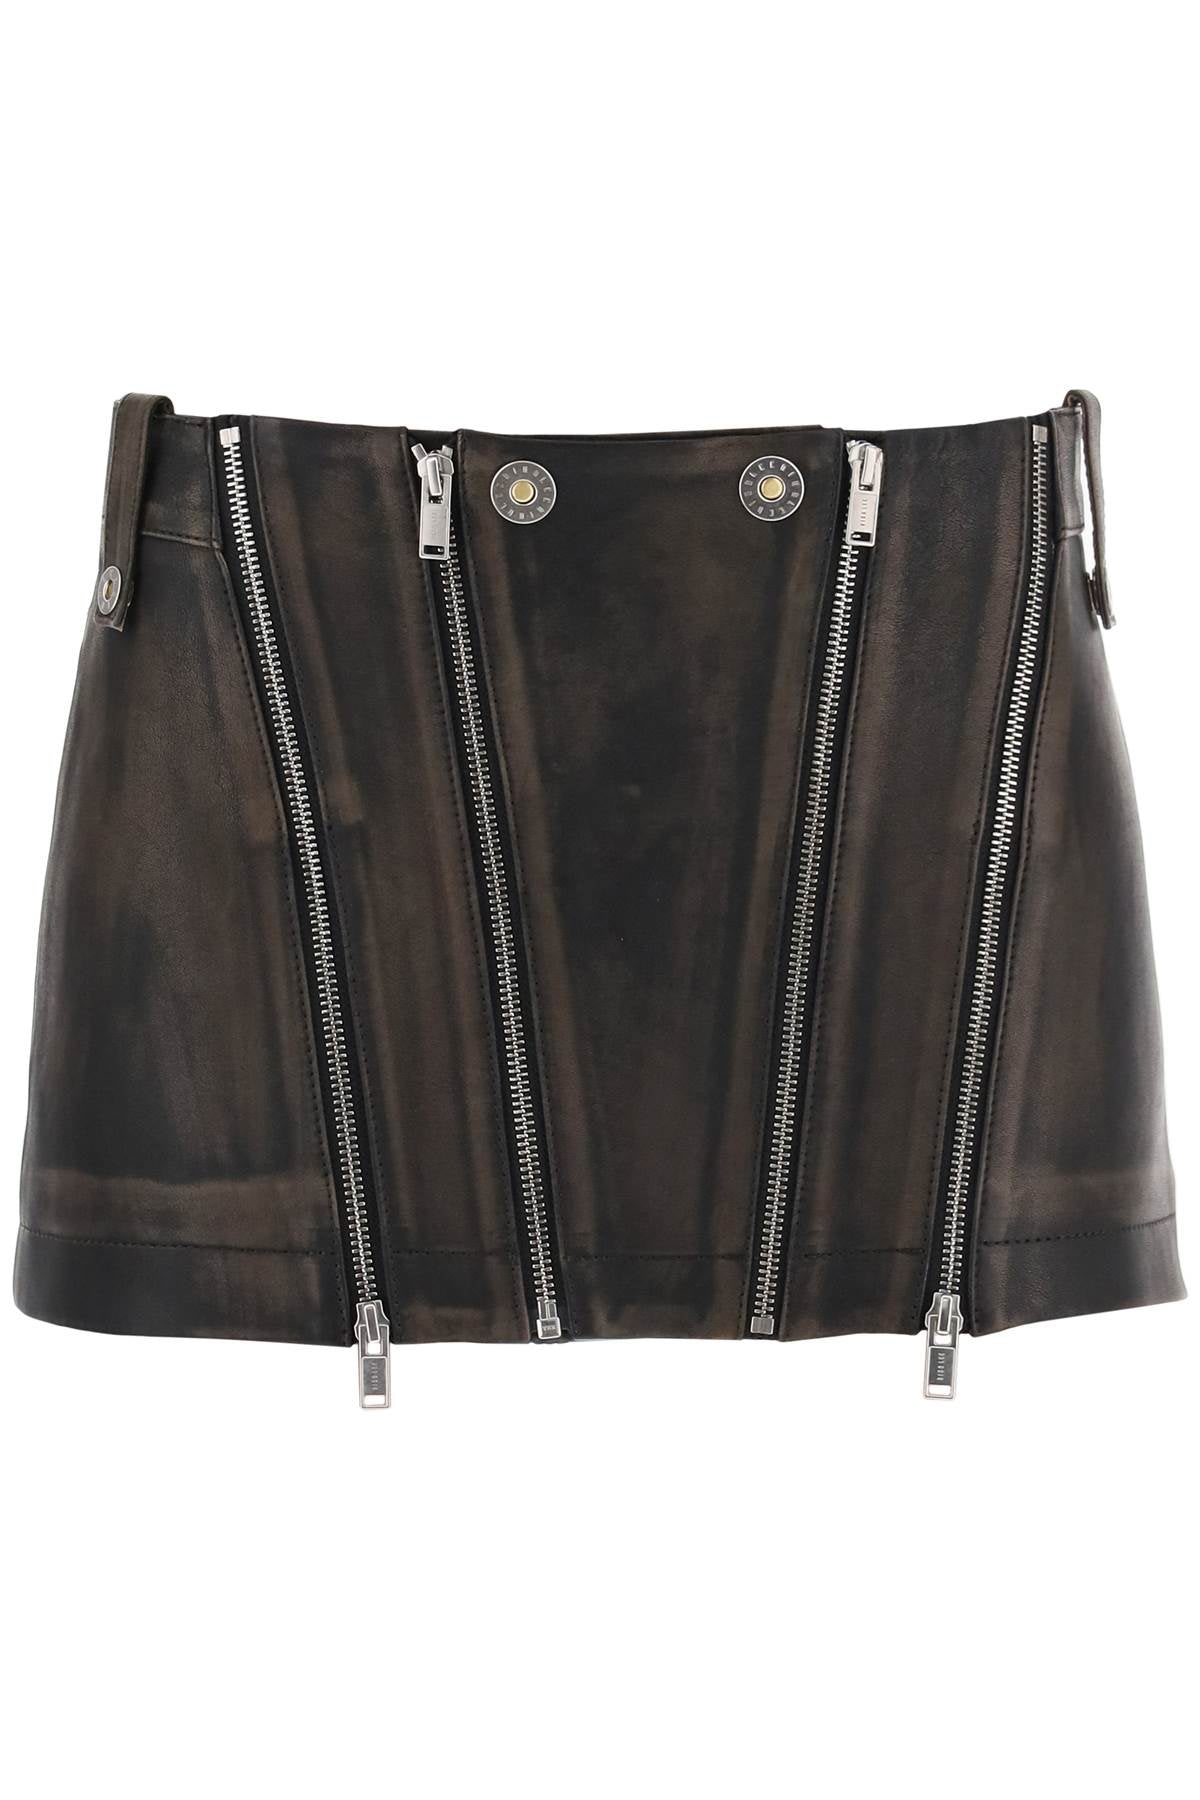 Dion lee leather biker micro skirt A1440P23 BLACK